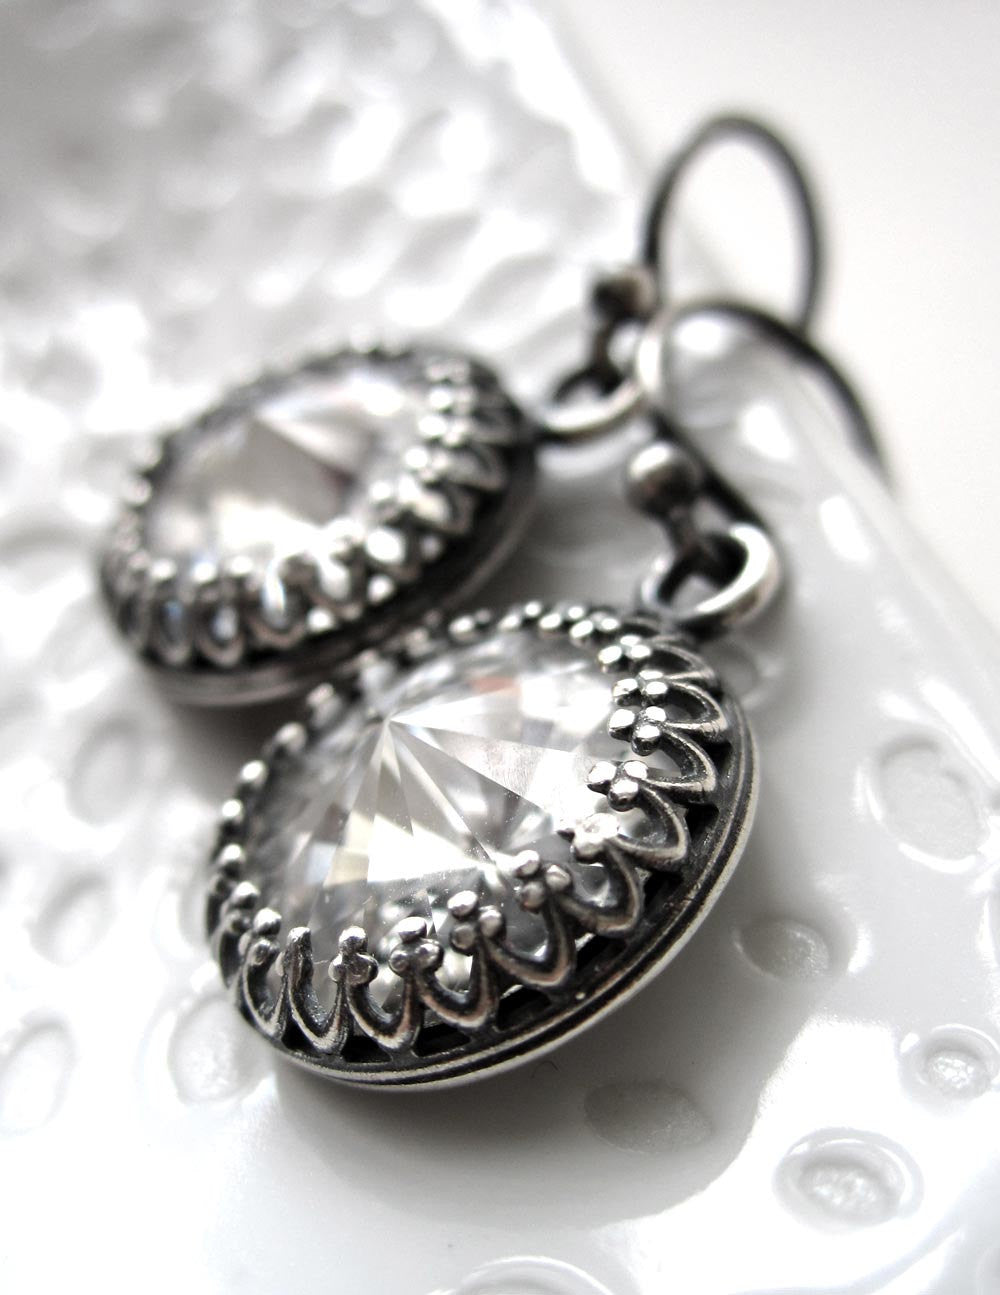 ROYAL - Clear Crystal Earrings with Antiqued Silver Crown Bezels